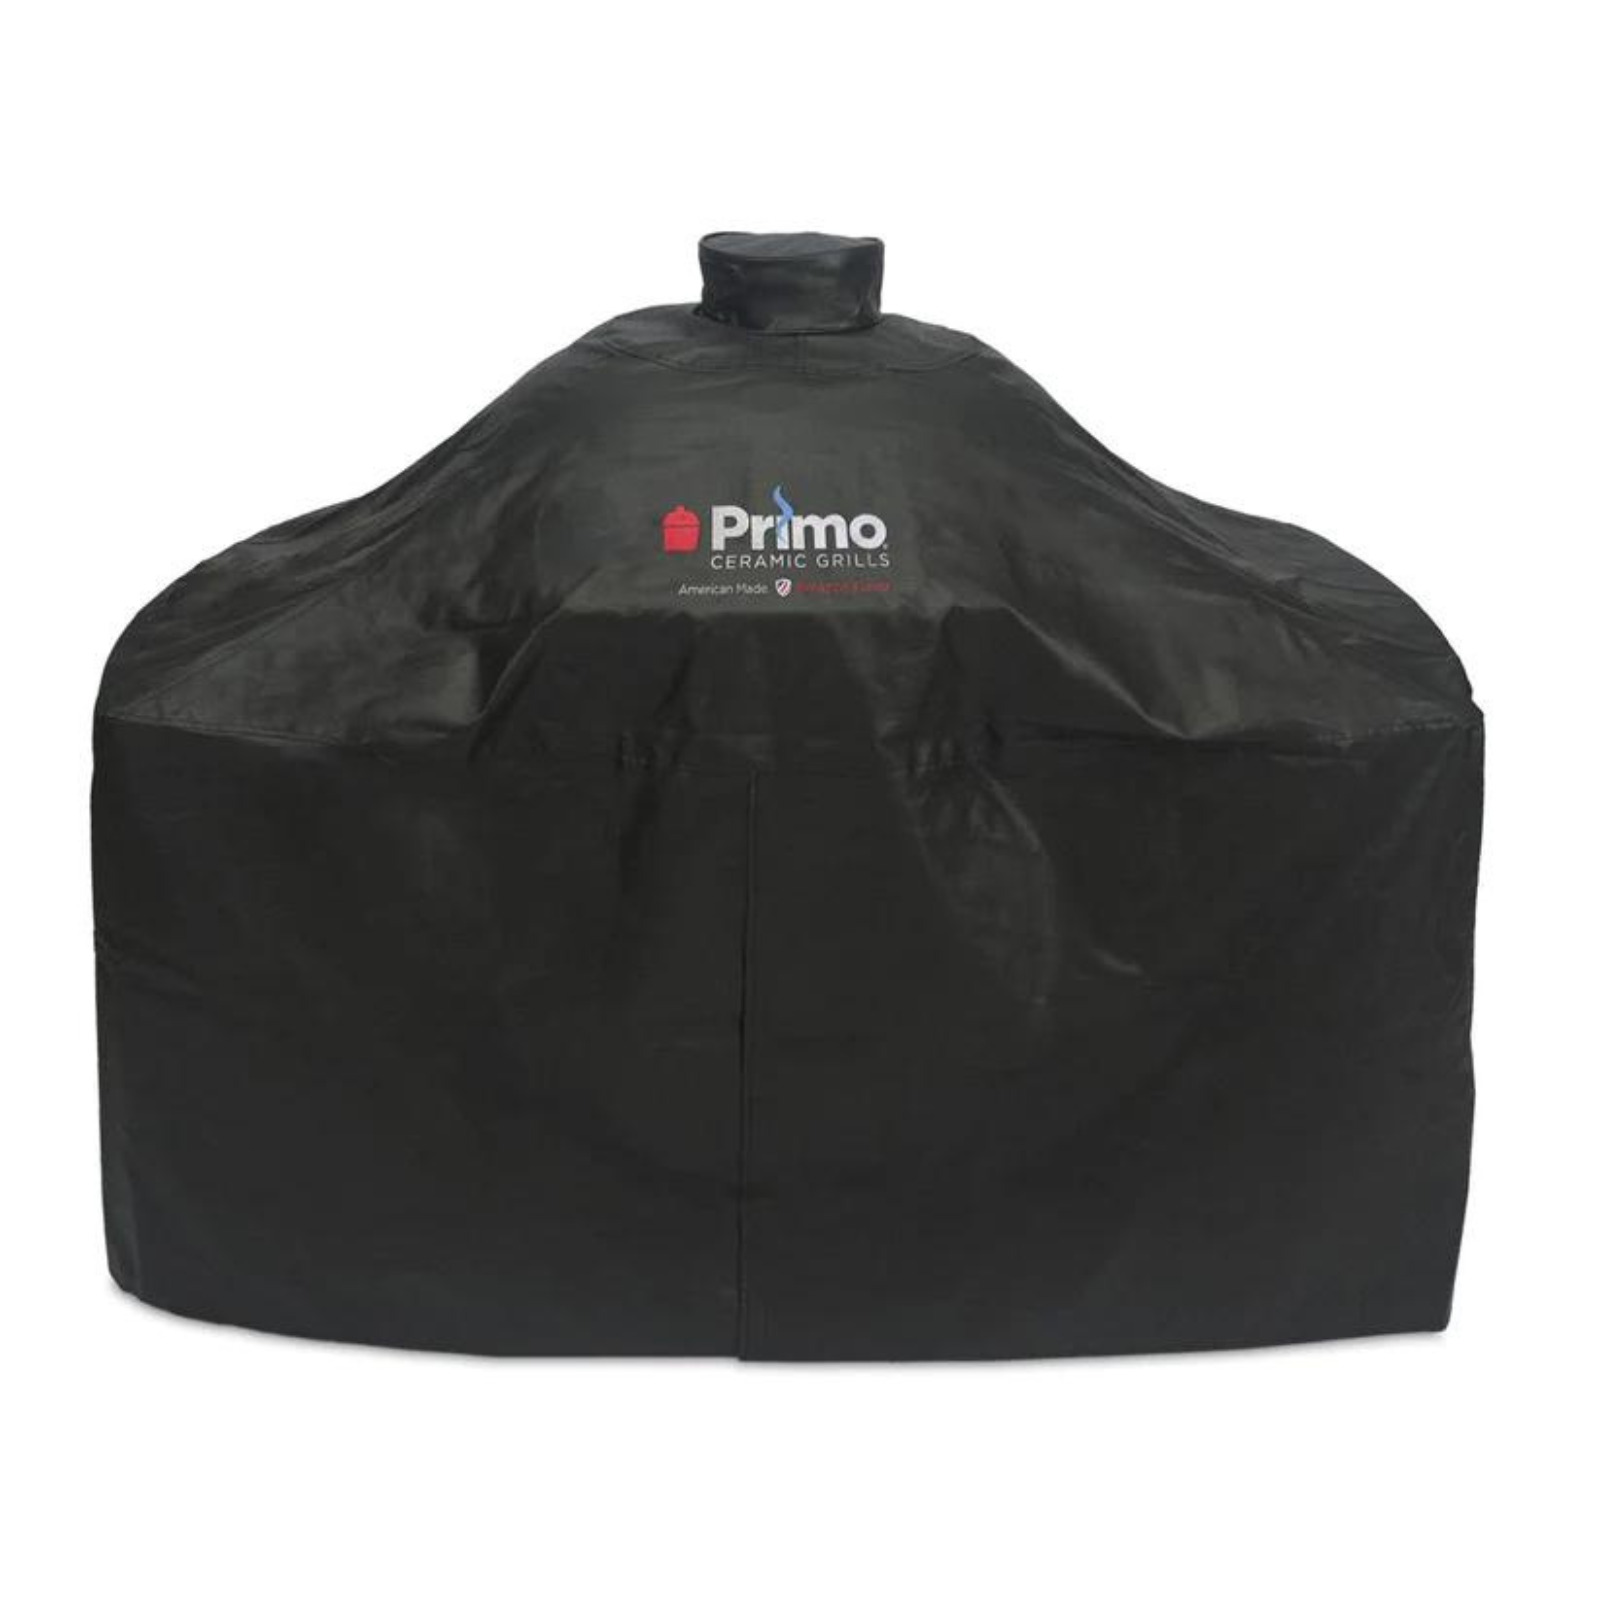 Primo Grill Cover for XL 400 with Countertop Table